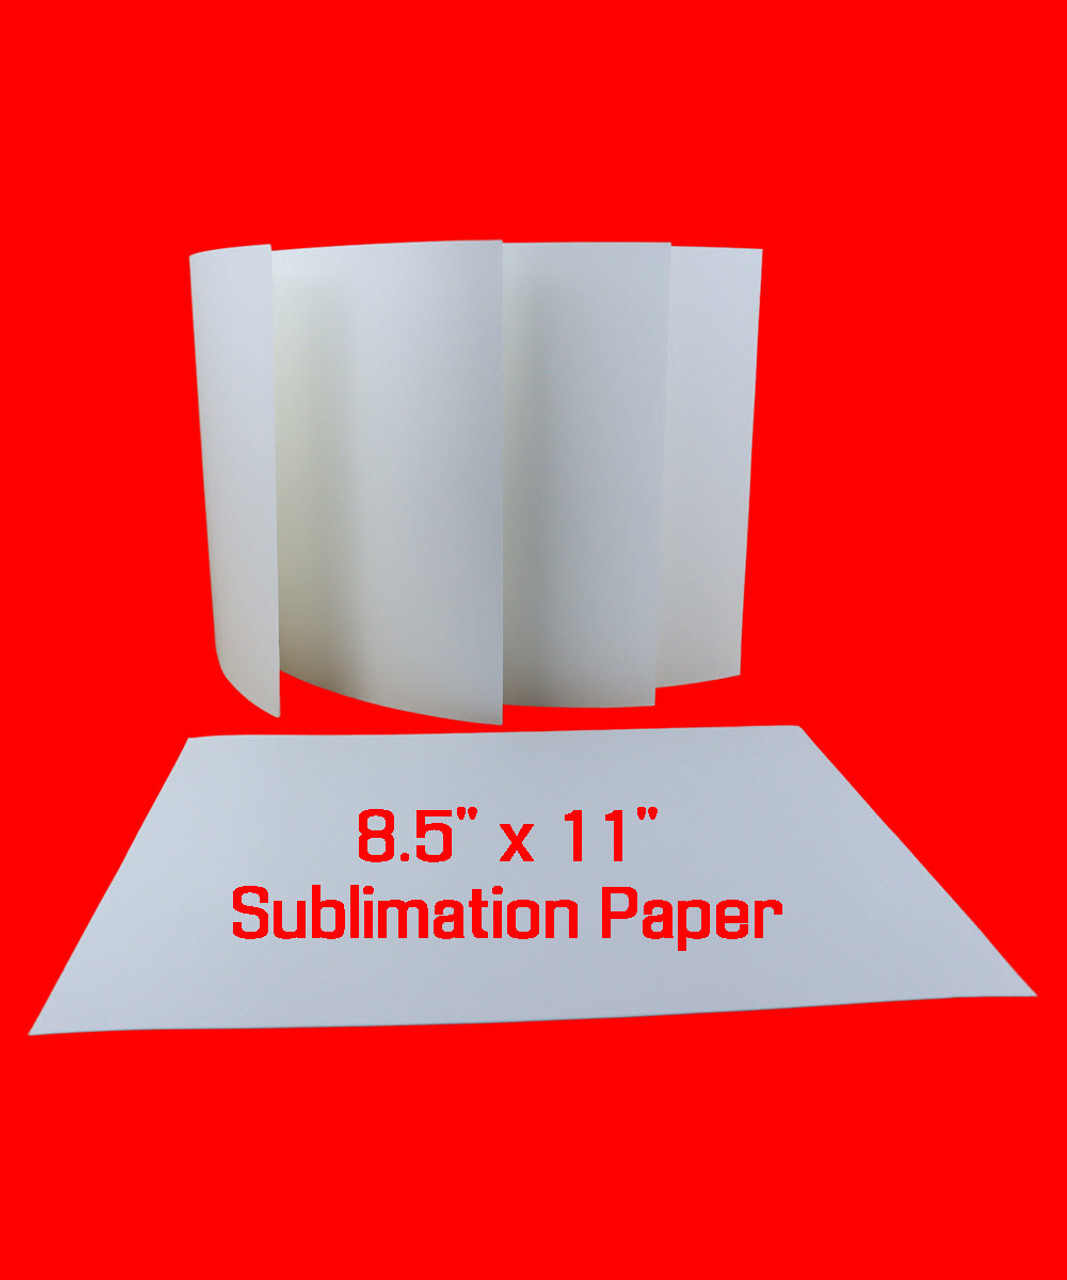 8.5 x 11 inch Sublimation Paper Lay Flat NO CURL paper 120GSM 100 Sheet Package
